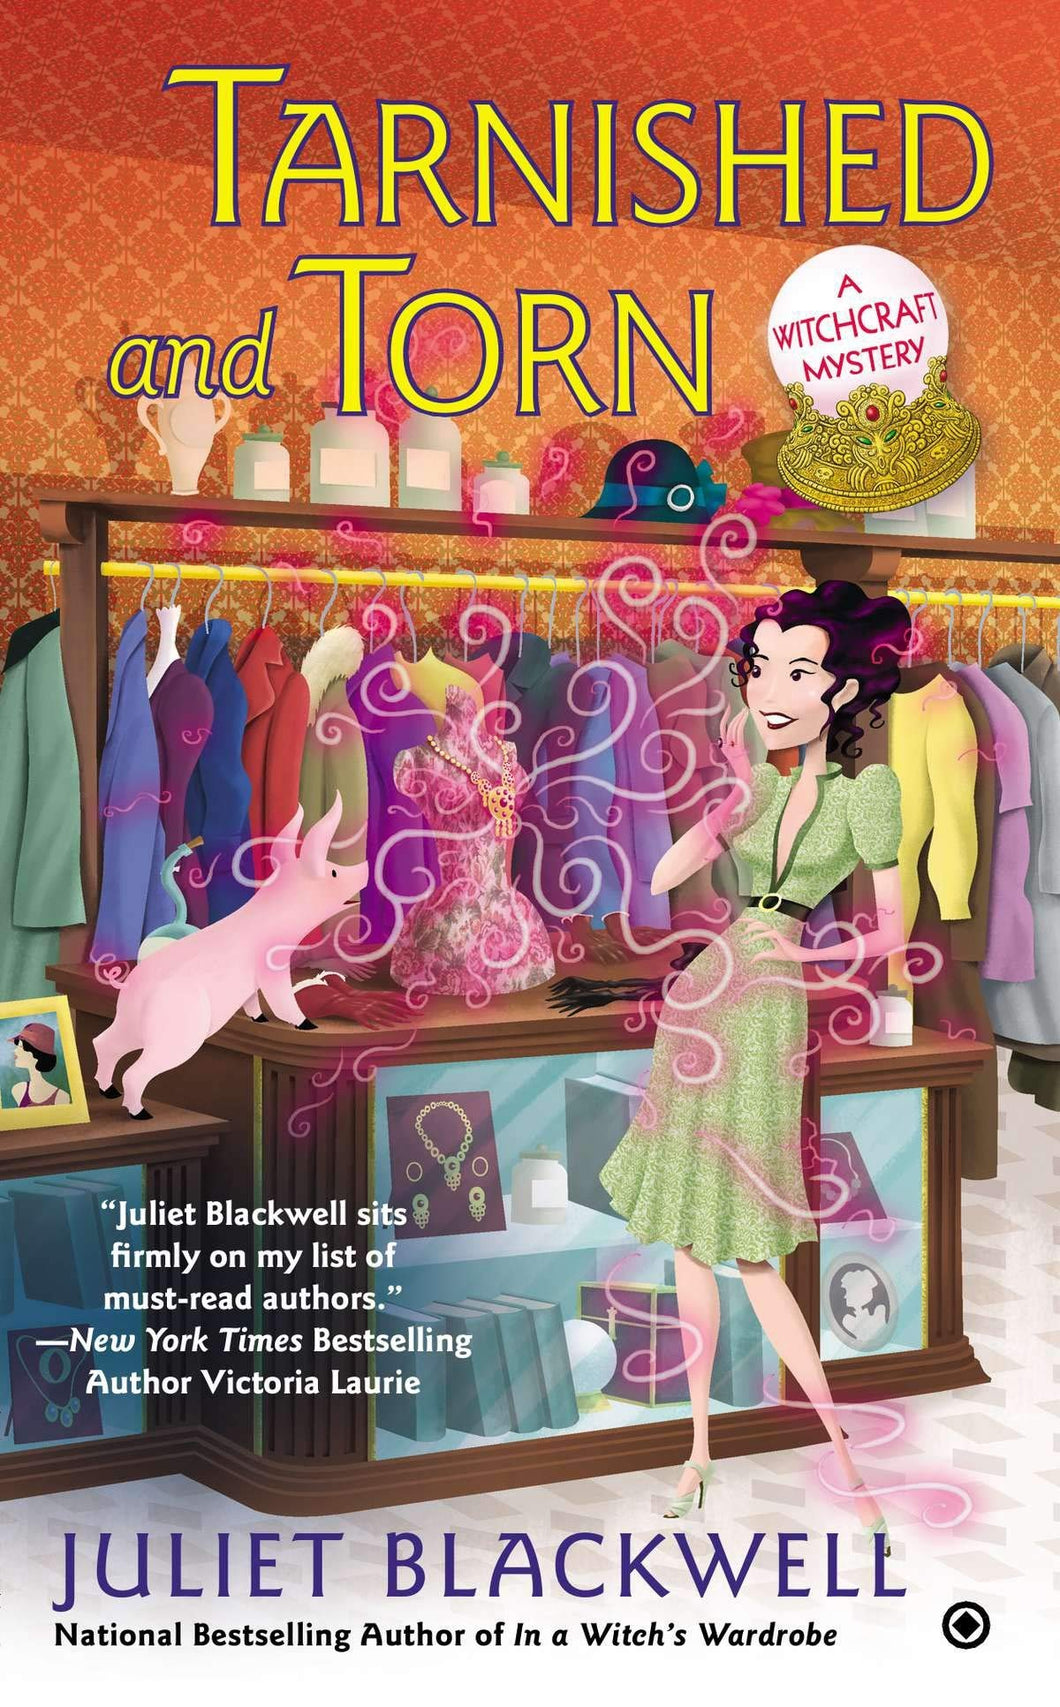 Tarnished and Torn: A Witchcraft Mystery [Juliet Blackwell]